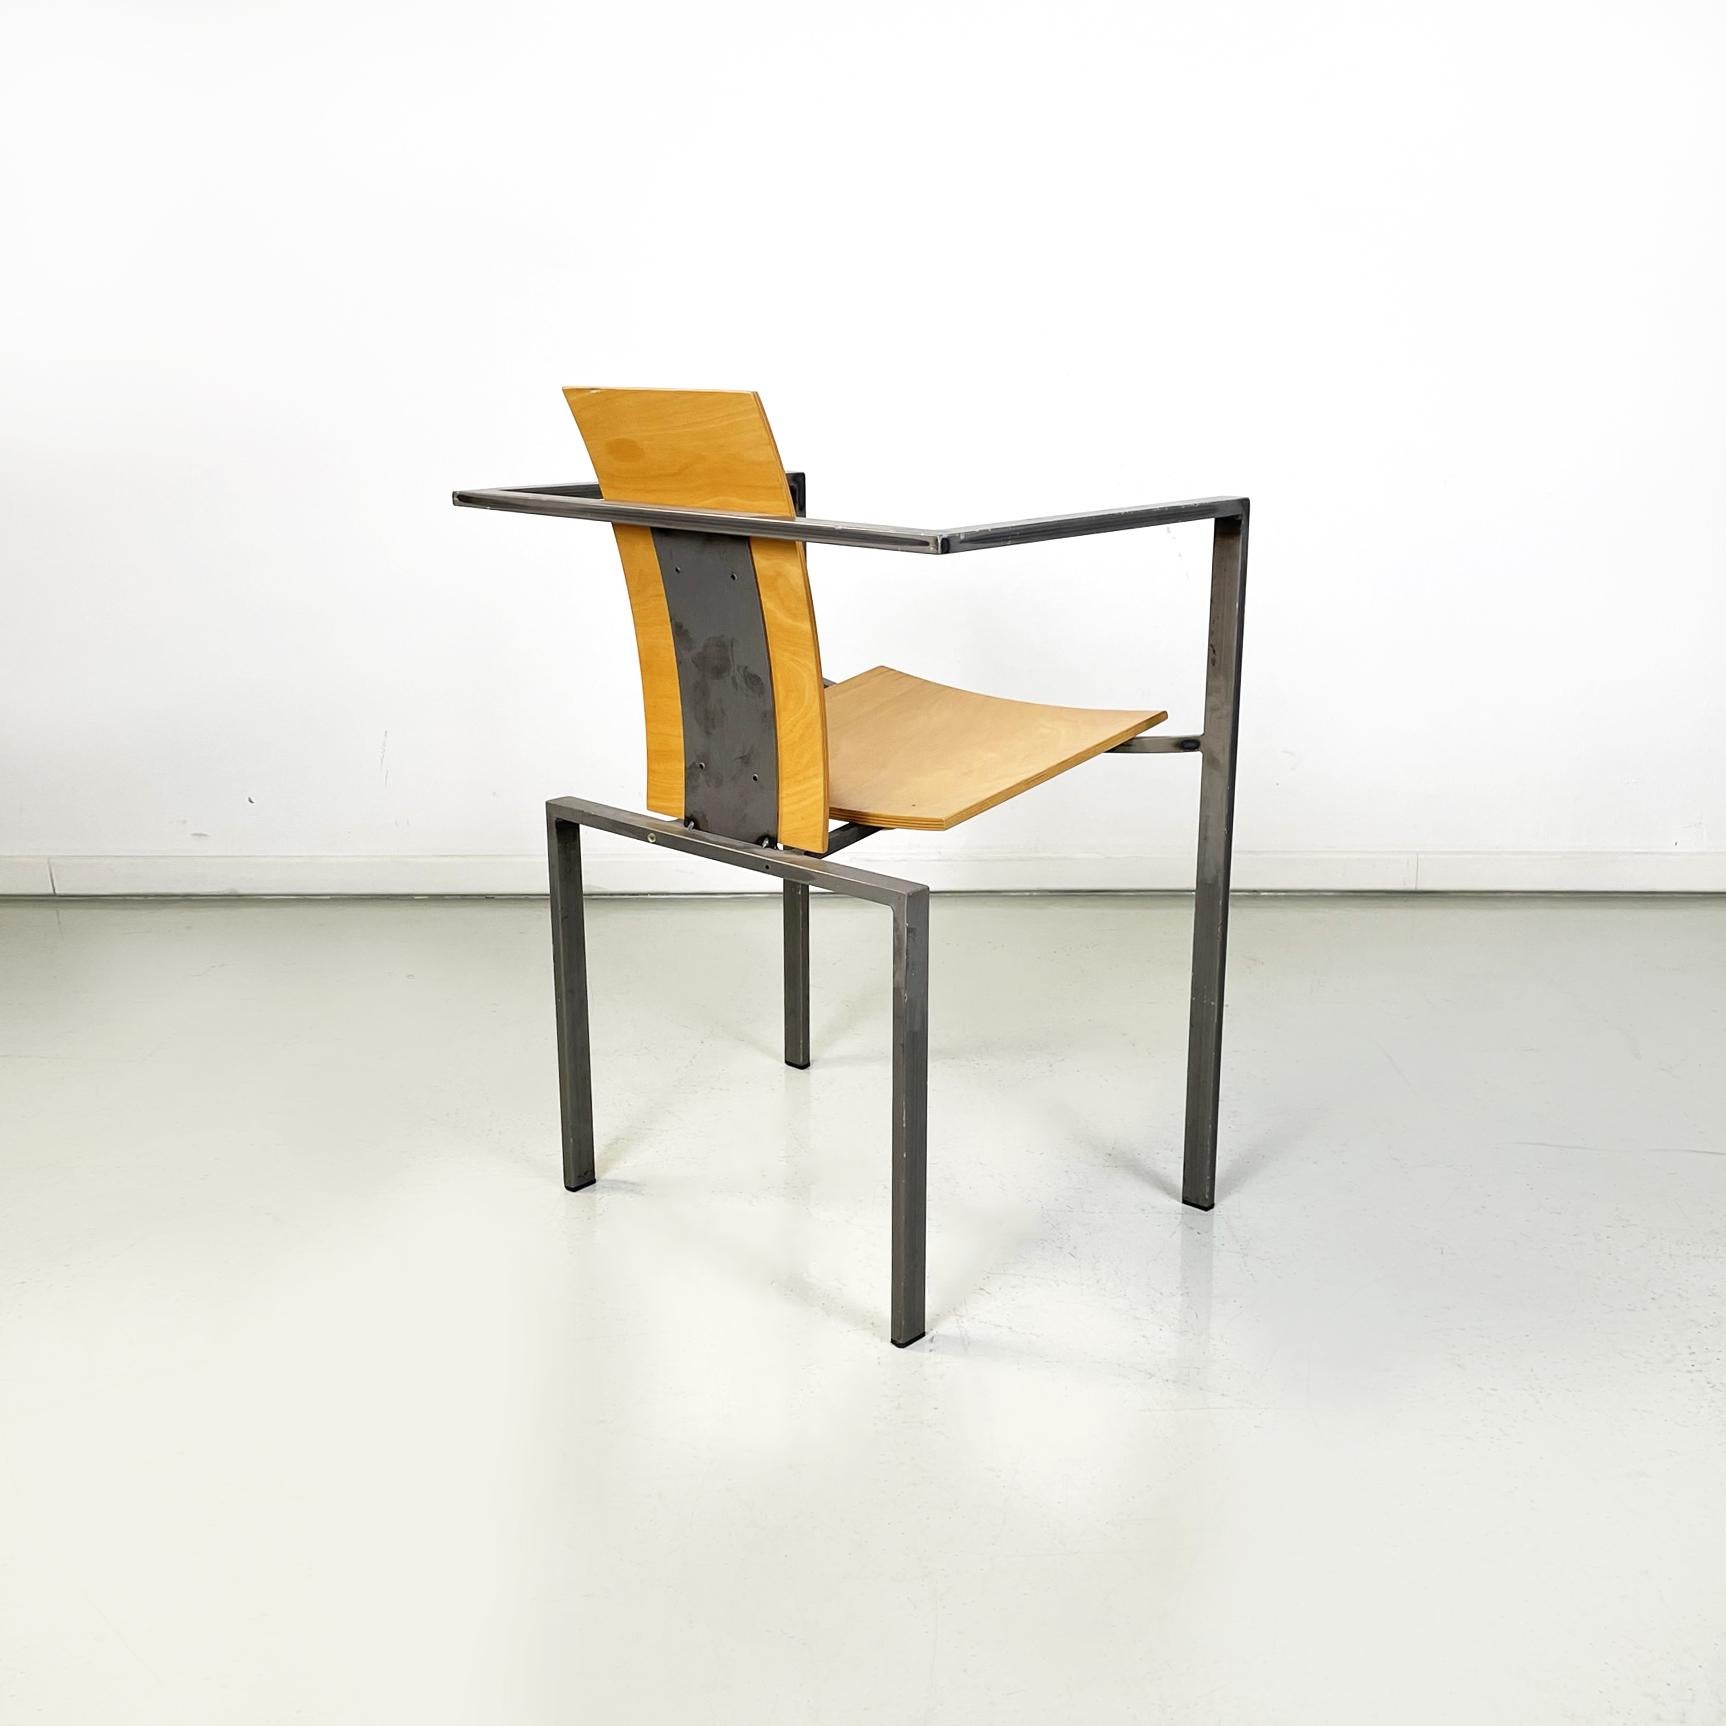 Late 20th Century German Modern Squared Chair in Wood and Metal by Karl-Friedrich Foster KKF, 1980 For Sale